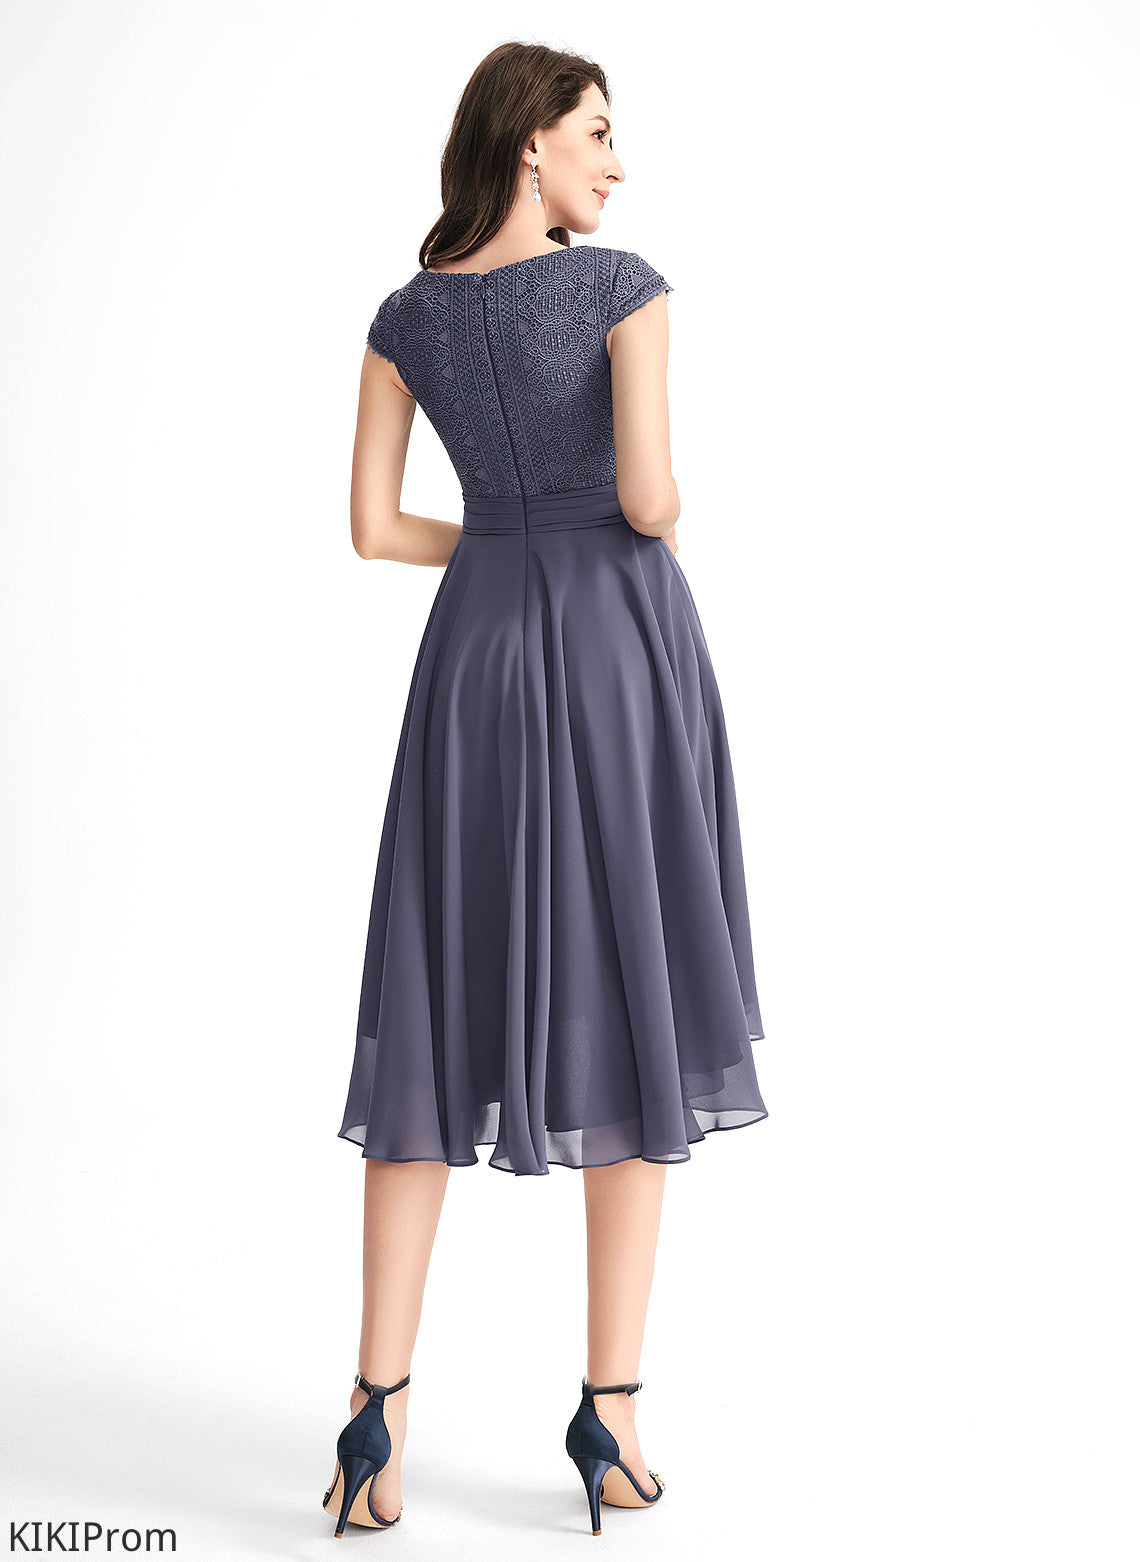 Cocktail Cocktail Dresses Chiffon Lace Logan A-Line With Pleated V-neck Dress Asymmetrical